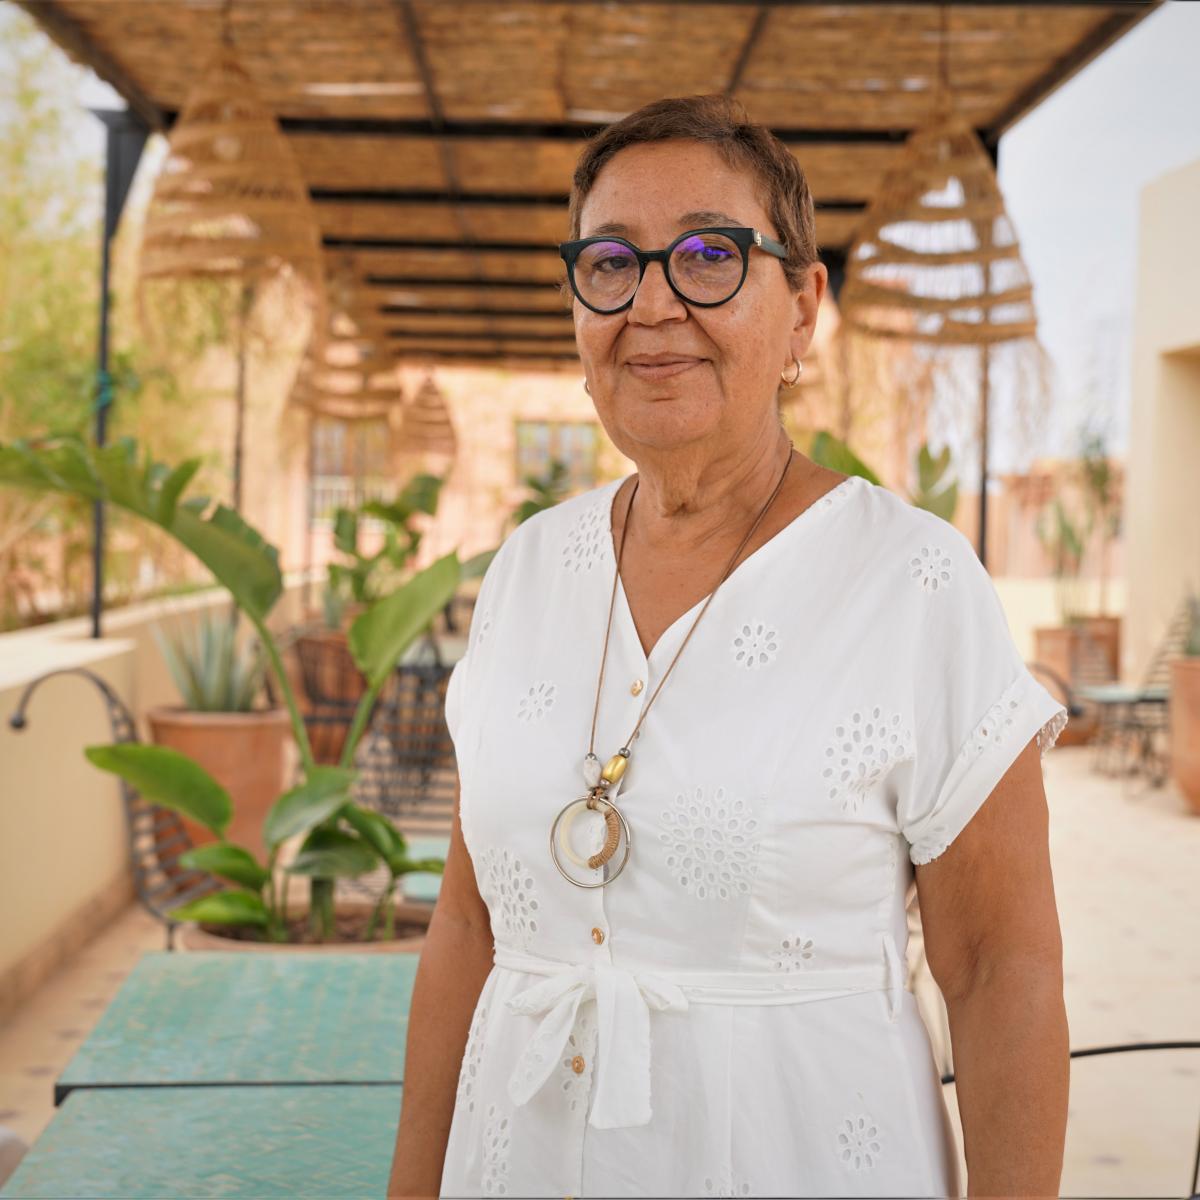 A Moroccan woman smiles and proudly stands in a rooftop restaurant looking at the camera.